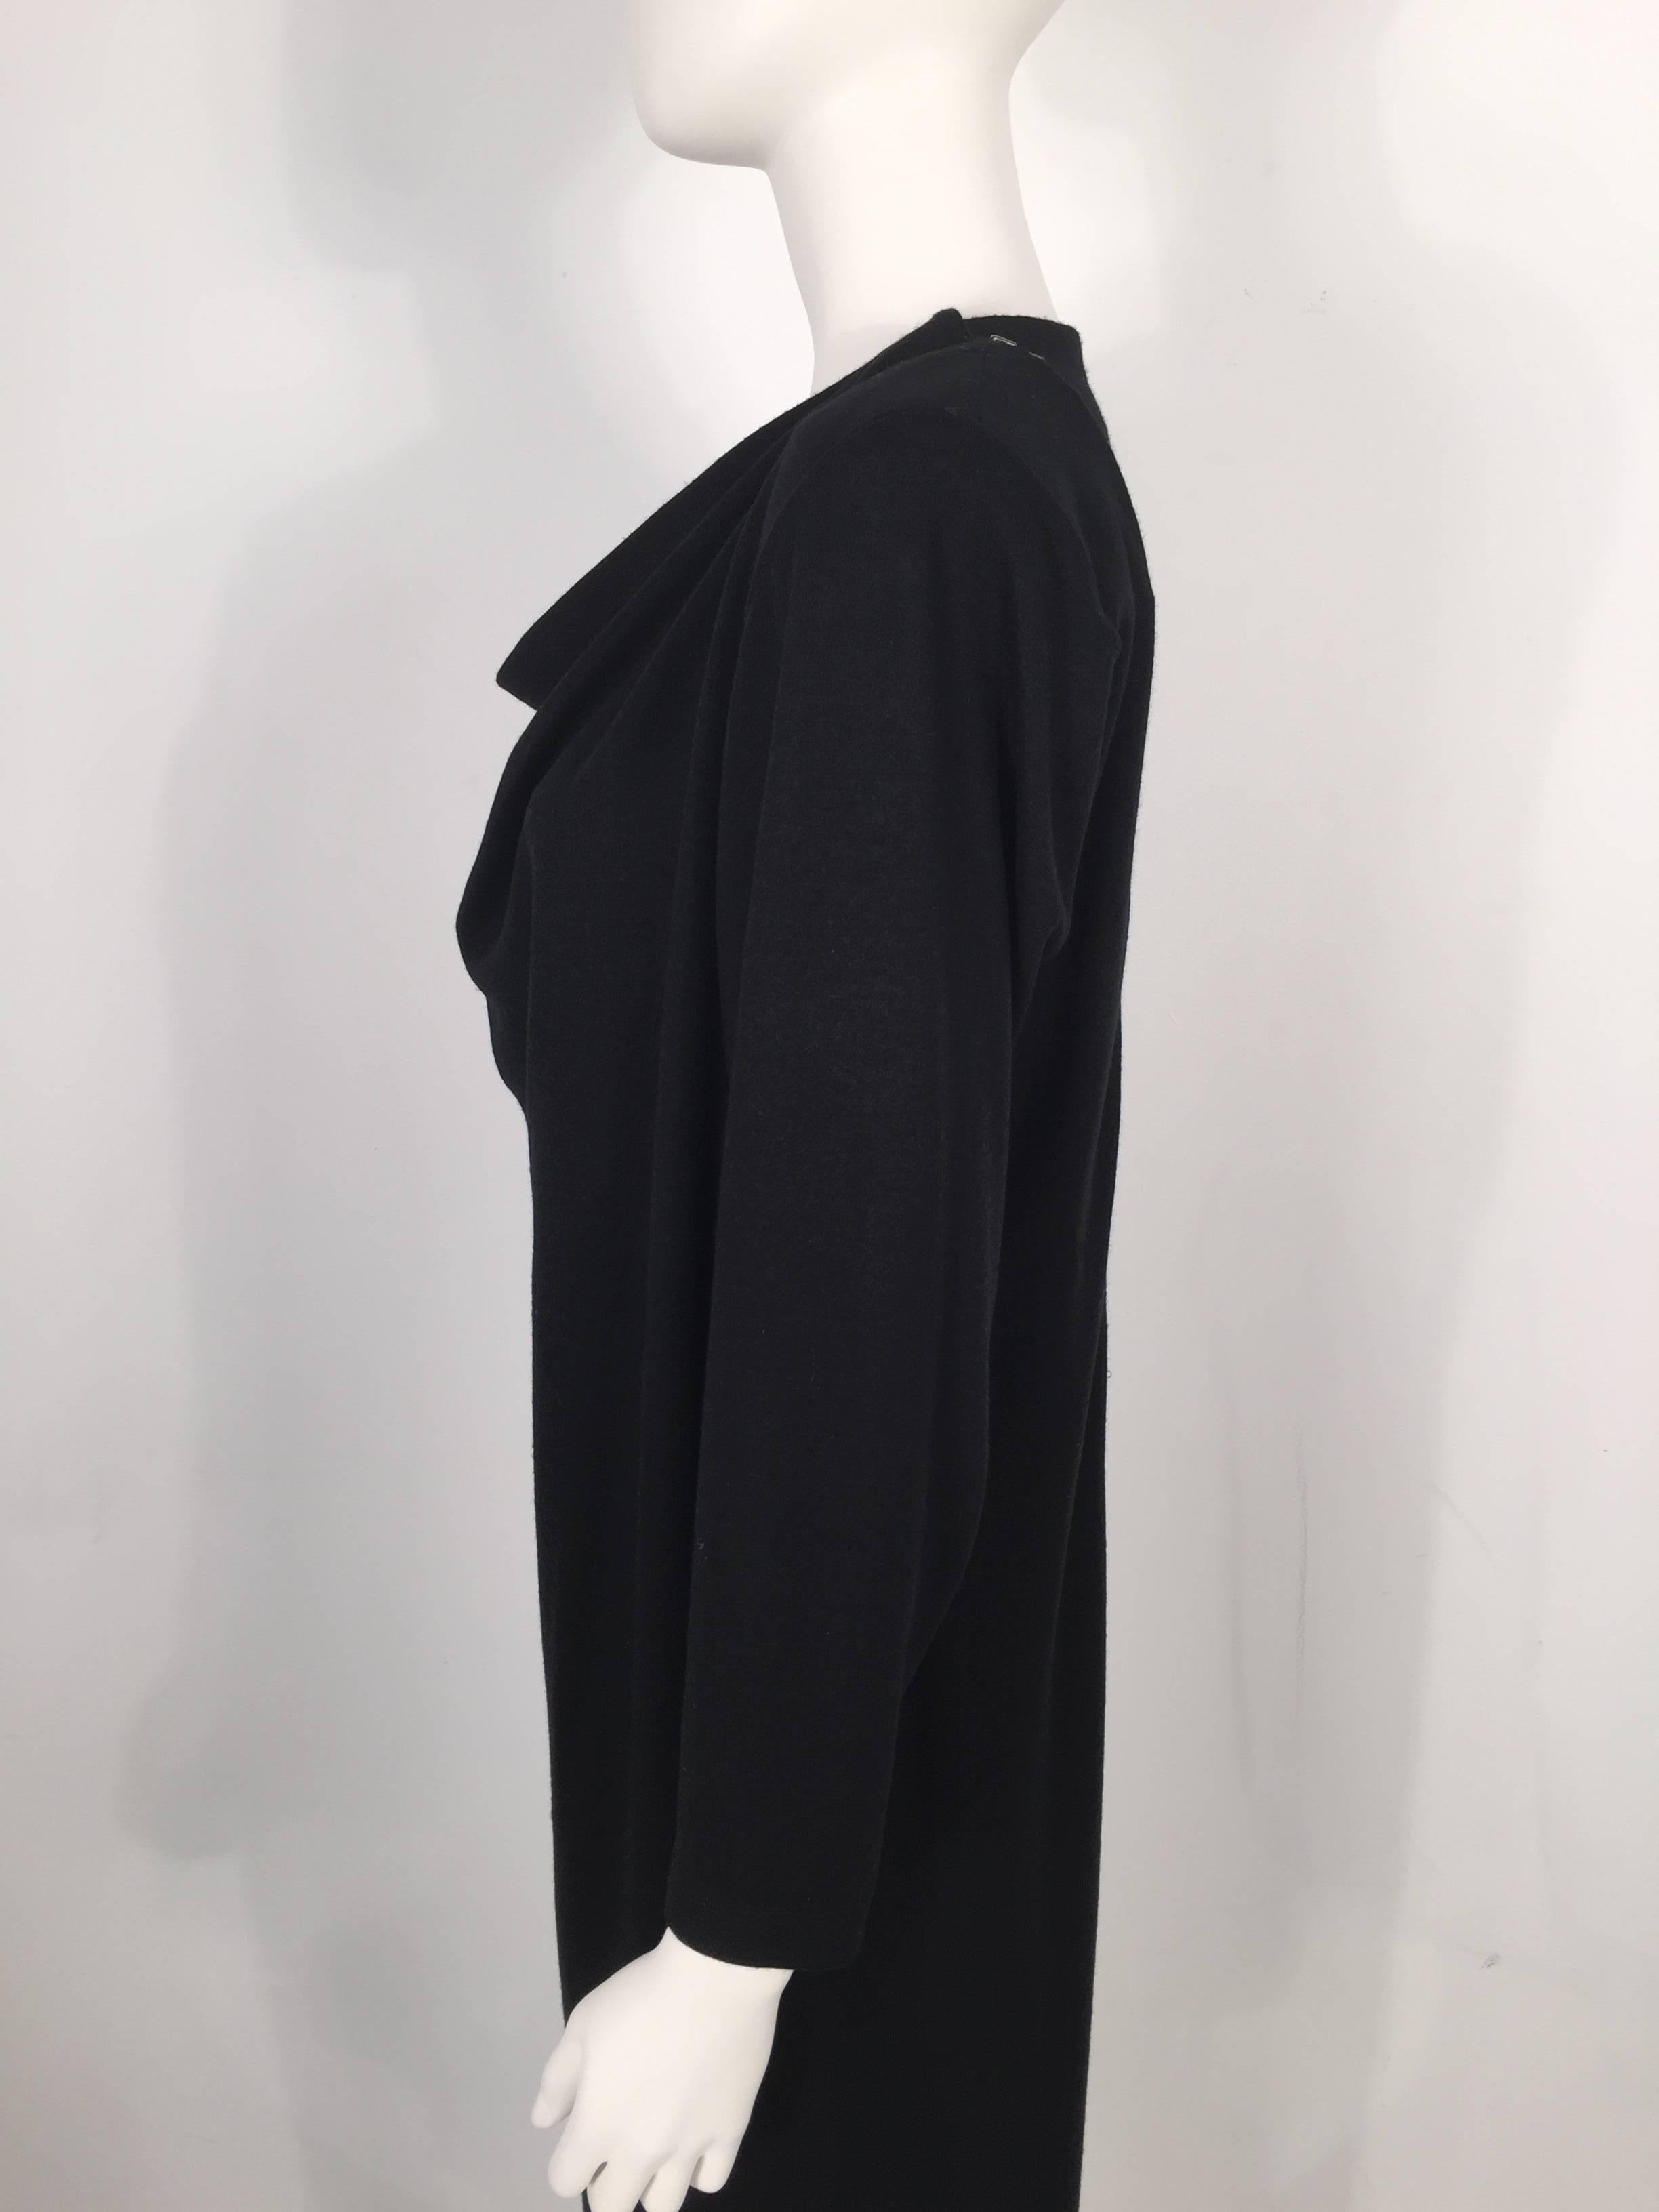 Women's Issey Miyake Black Cashmere Dress For Sale